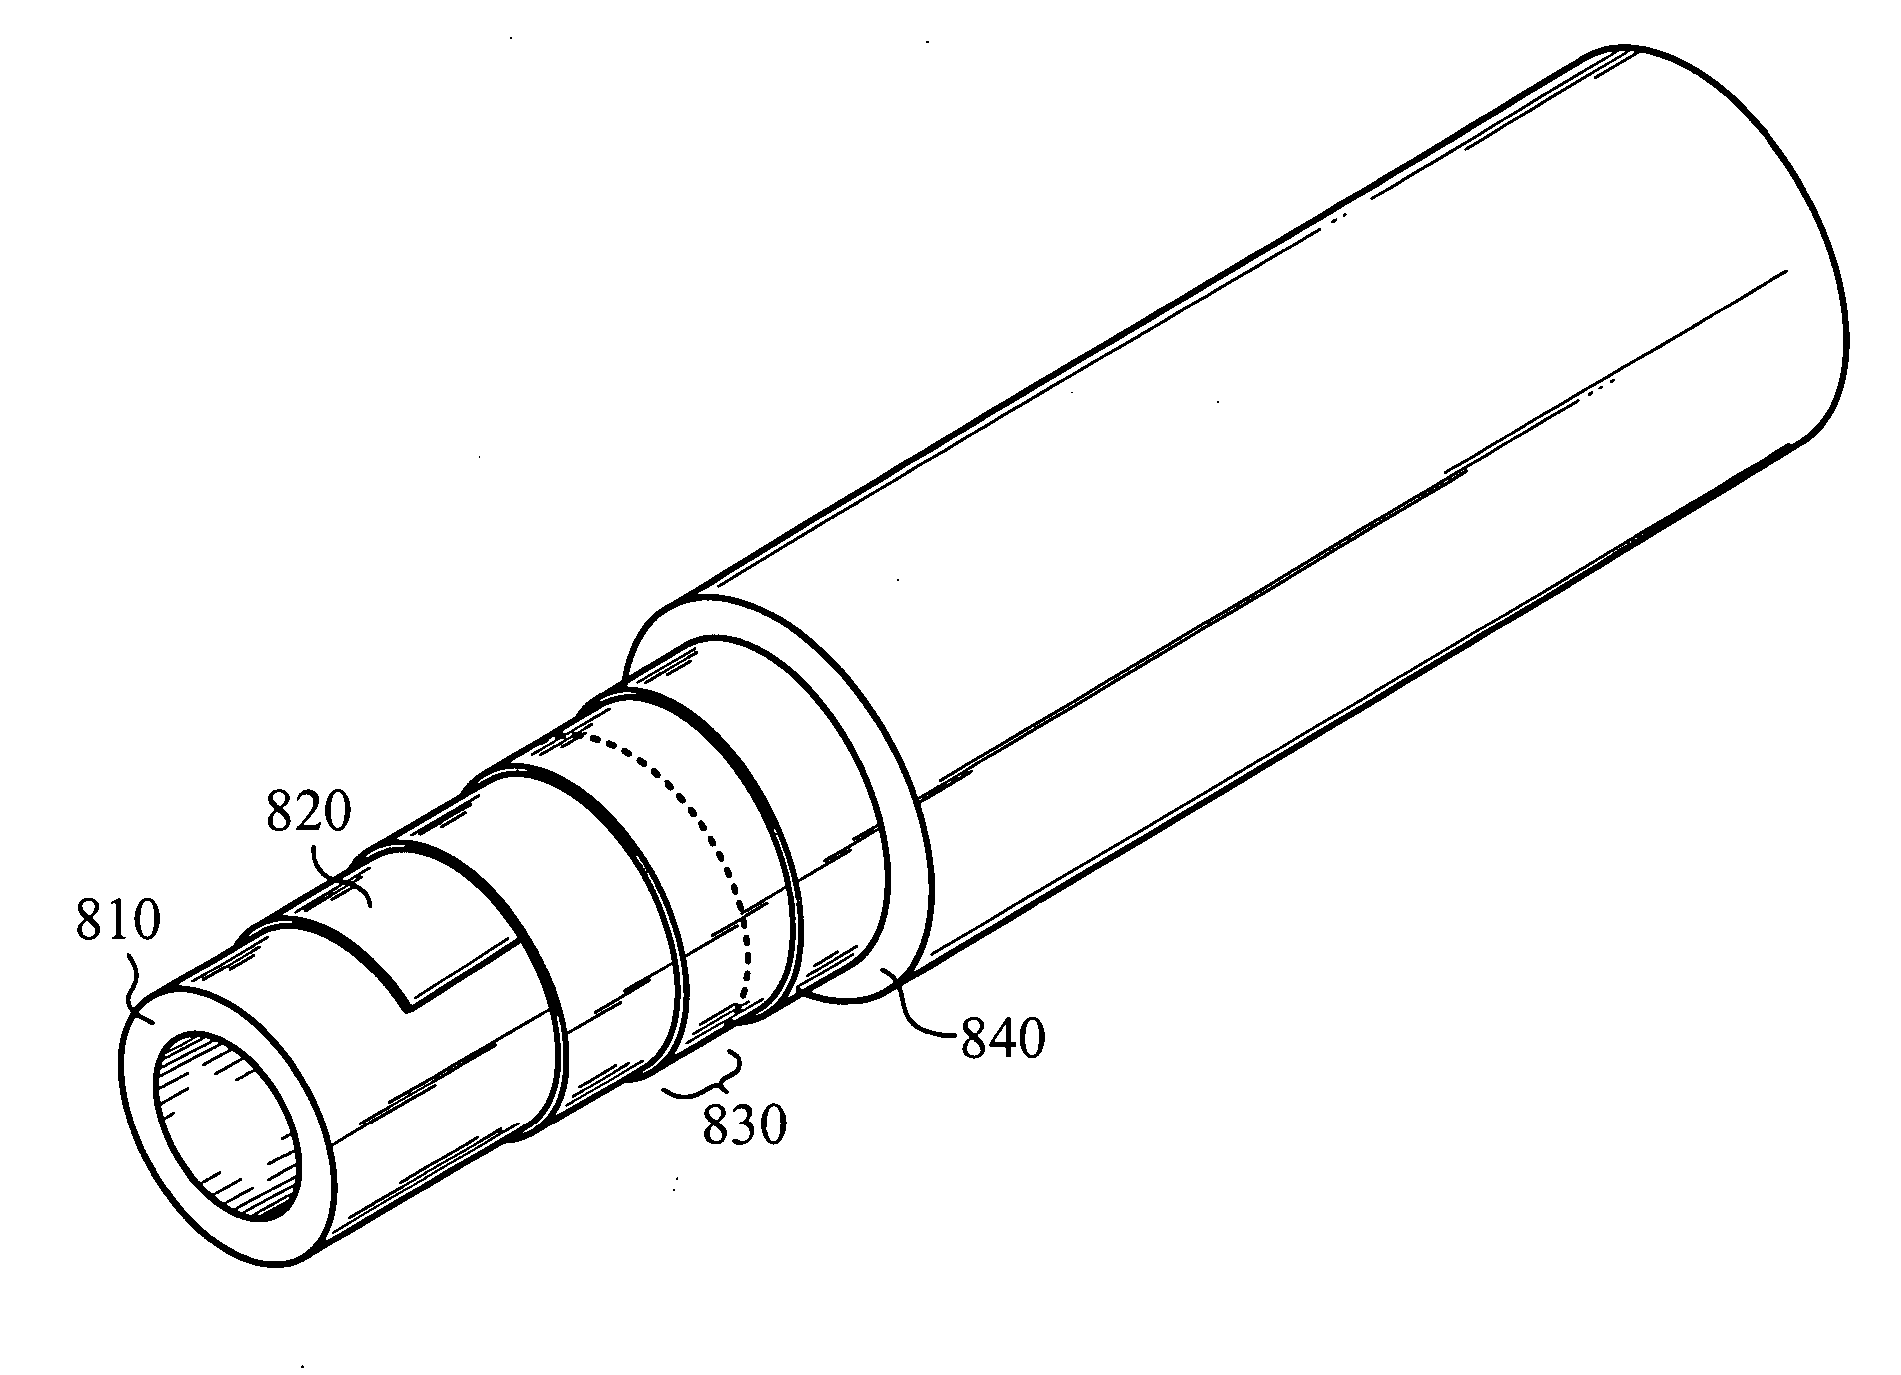 Tape-wrapped multilayer tubing and methods for making the same